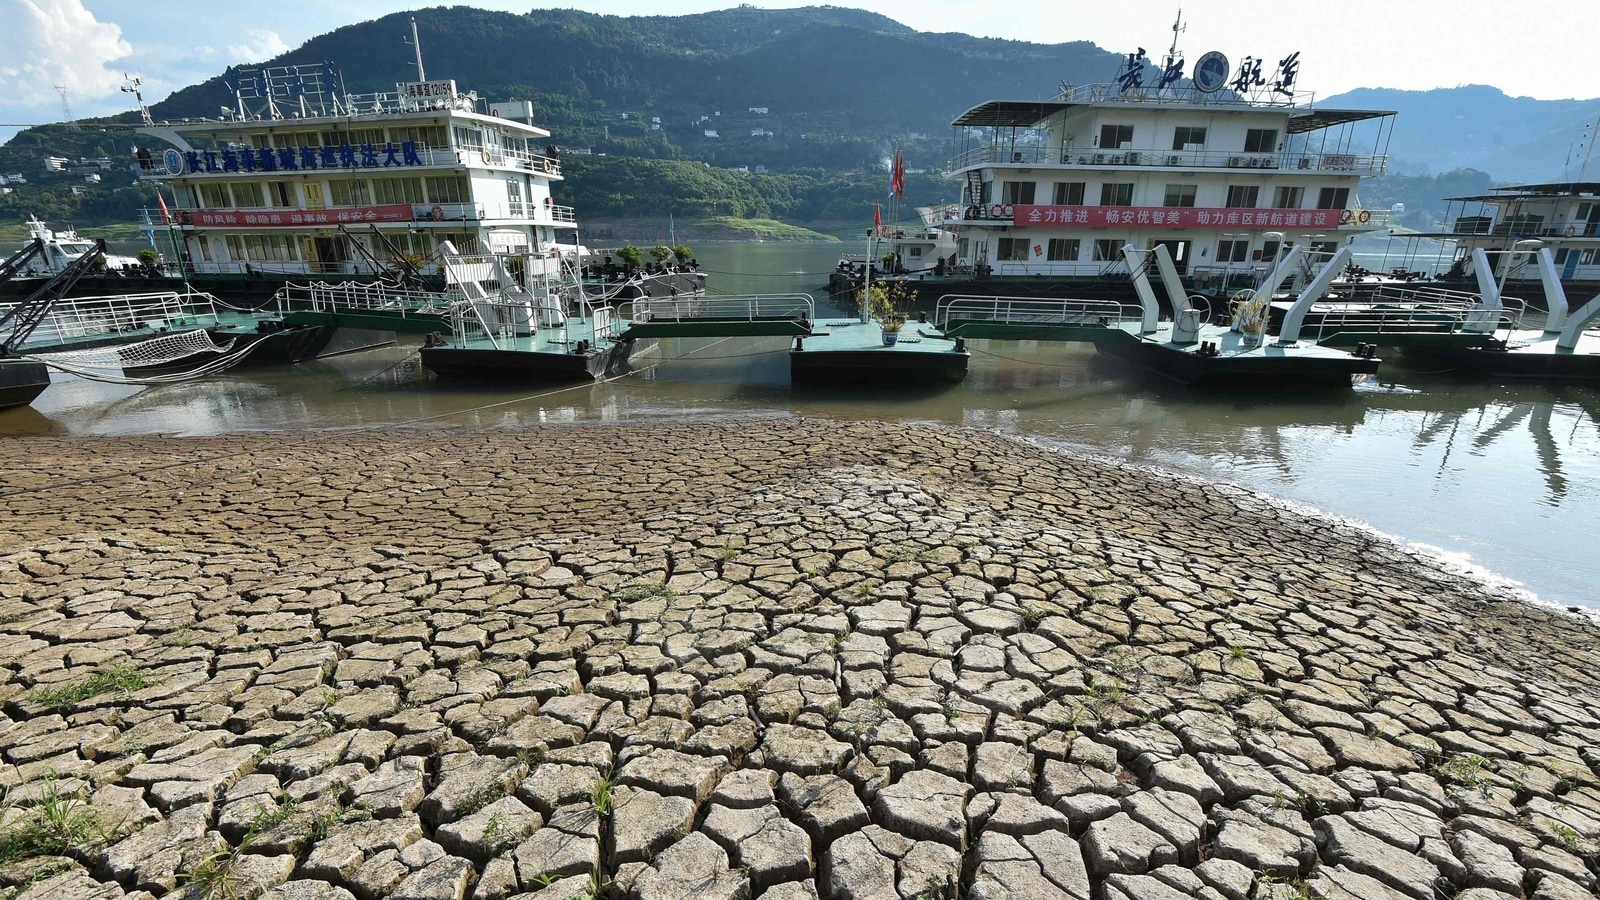 China declares national drought, heatwave threatens crops 5 points